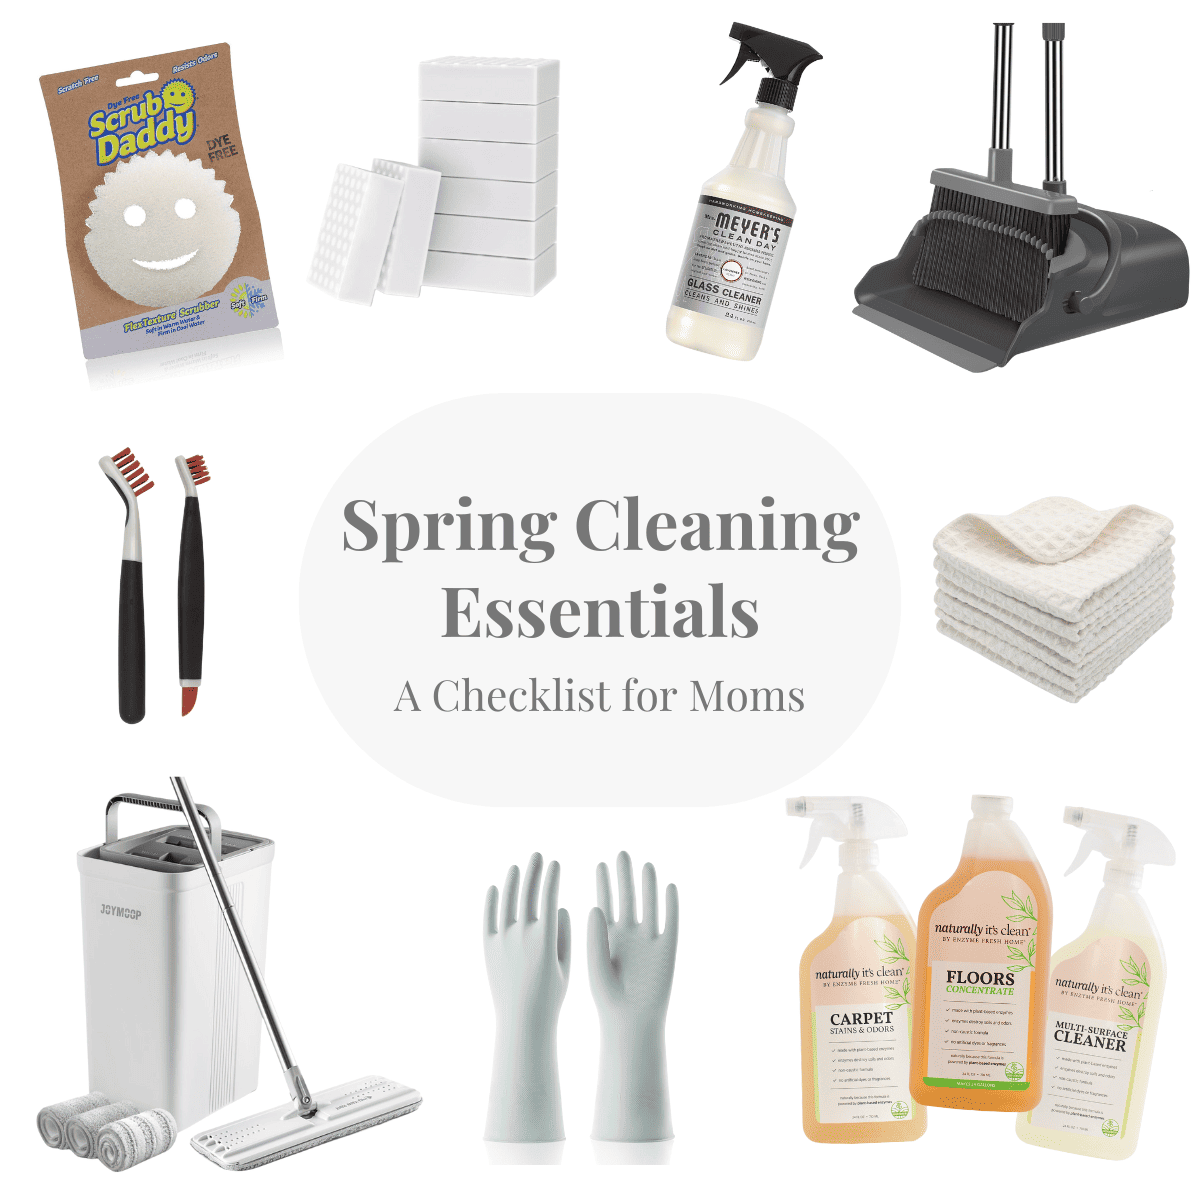 Spring Cleaning Essentials – A Checklist for Moms